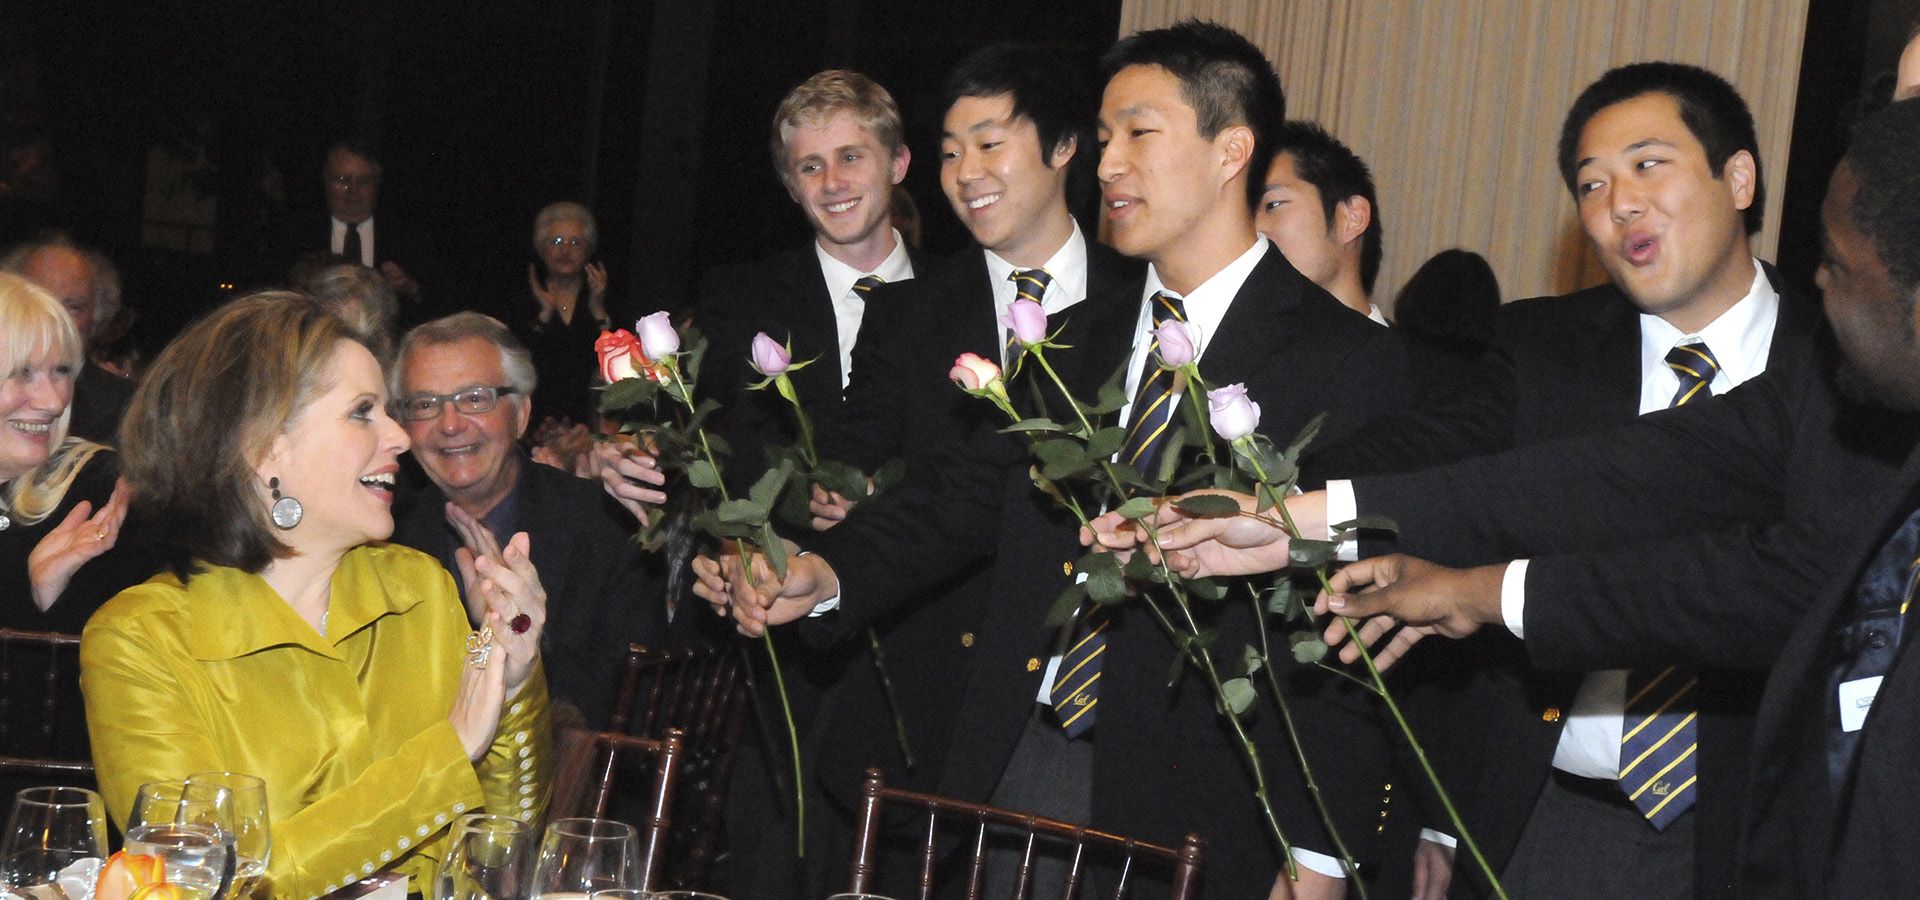 Students handing flowers to woman at table